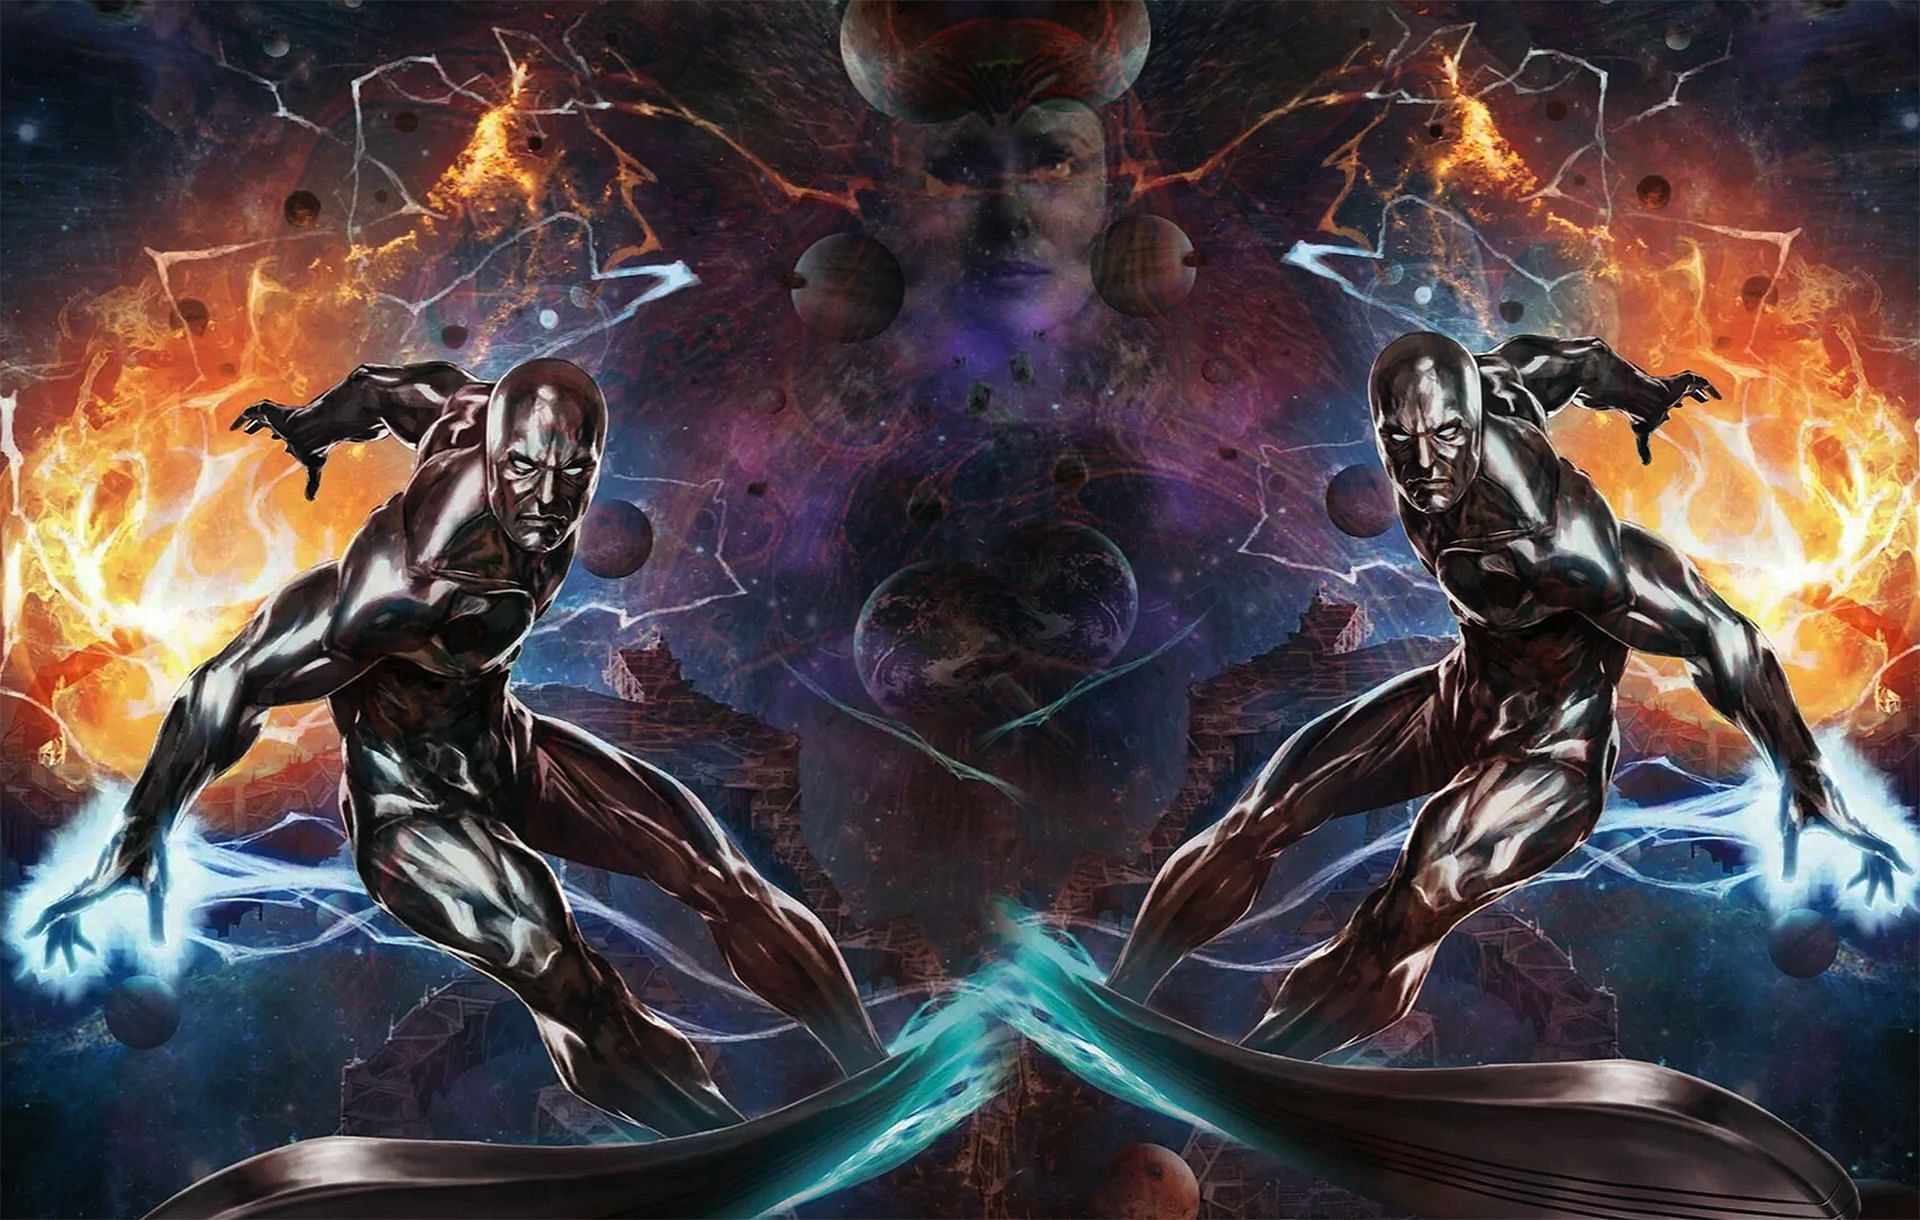 Silver Surfer is a humanoid cosmic entity born from a fusion of two opposing cosmic energies. (Image via Marvel)